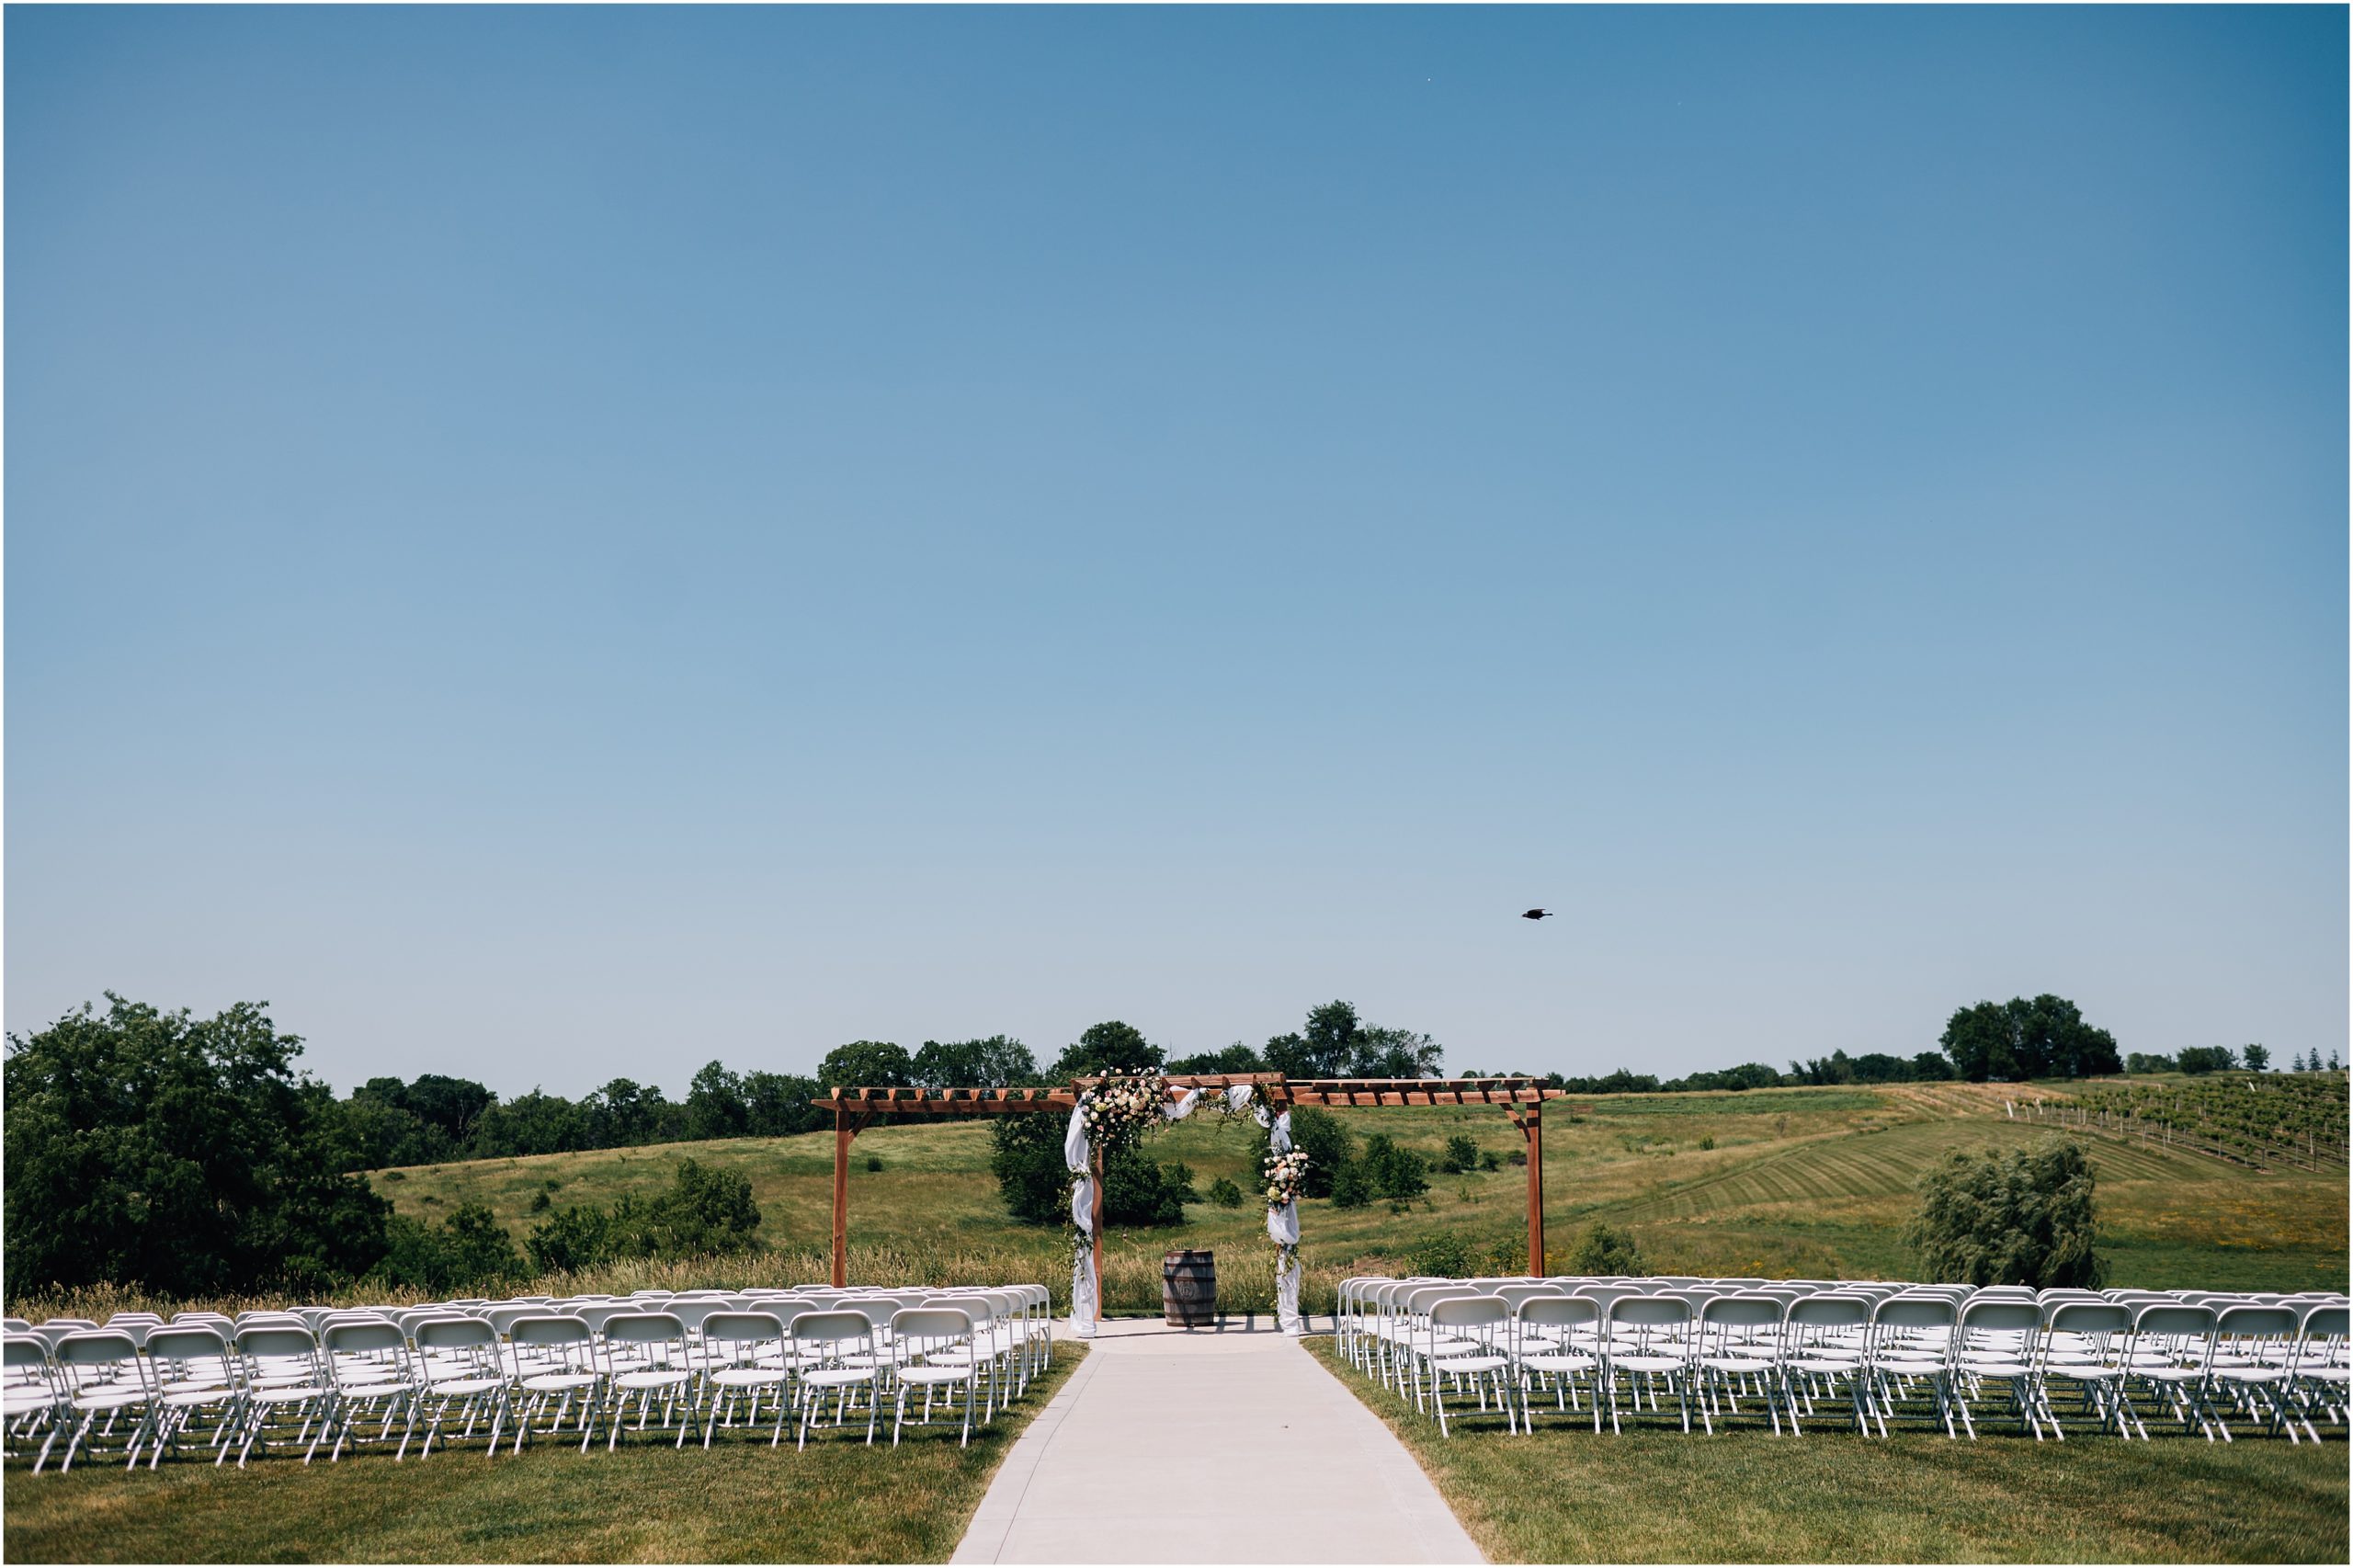 The outdoor ceremony space at Carper Vineyard and Winery, a Des Moines wedding venue. Photo by Anna Brace, an Omaha Wedding Photographer.